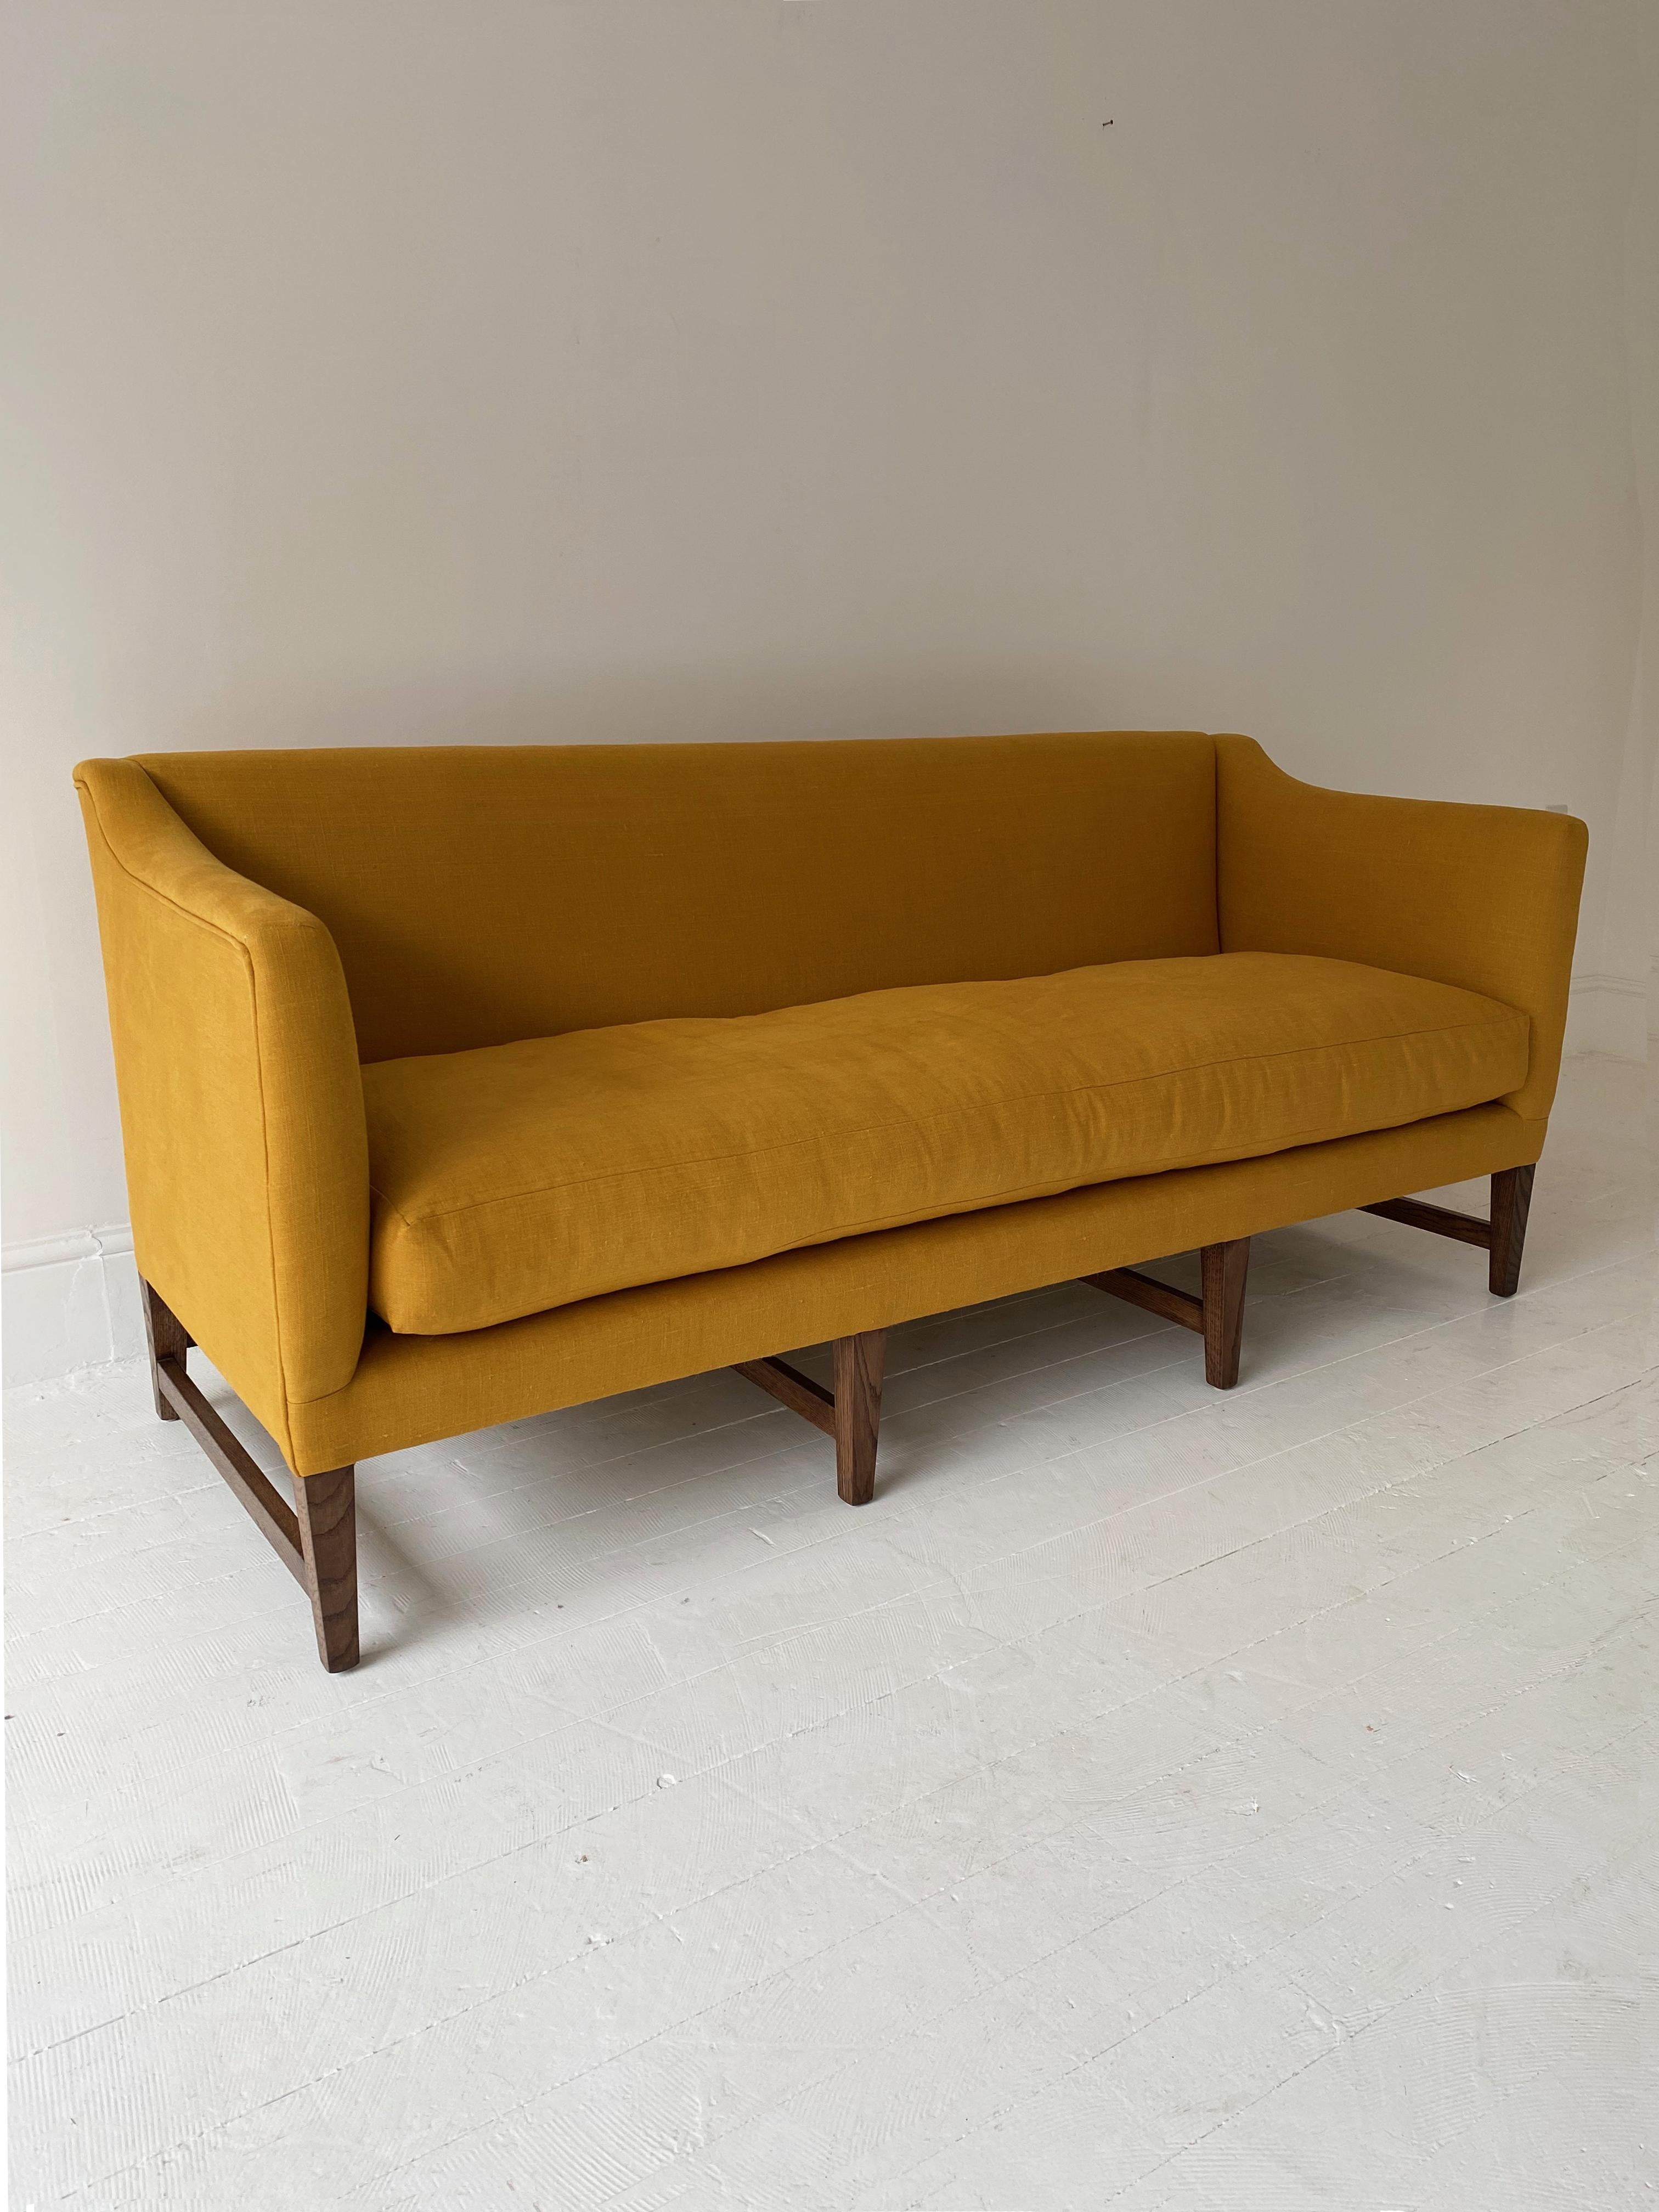 Being offered here is the newly made Ross Regency sofa by Noble. Built and upholstered for promotional and photography purposes. Covered in a beautiful dyed yellow Scottish linen with a plump feather and down cushion. 

The sofa is a faithful and